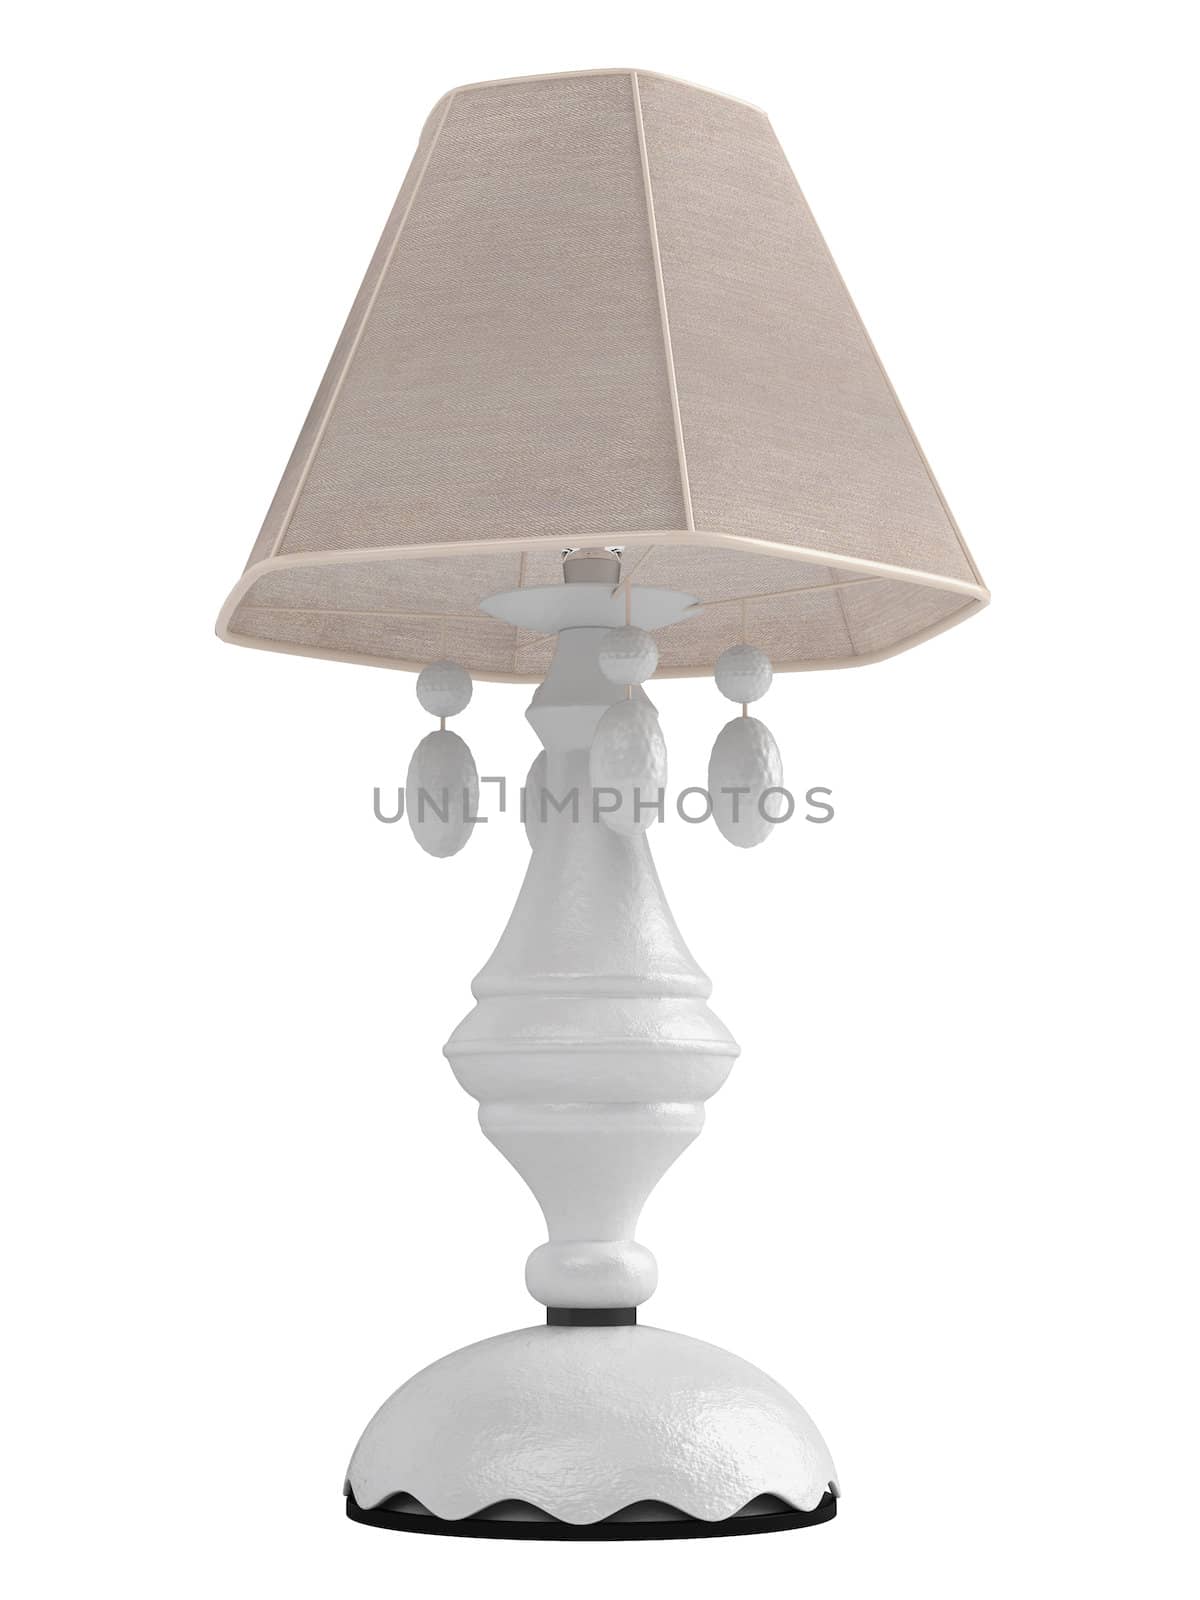 White lamp with hexagonal shade by AlexanderMorozov